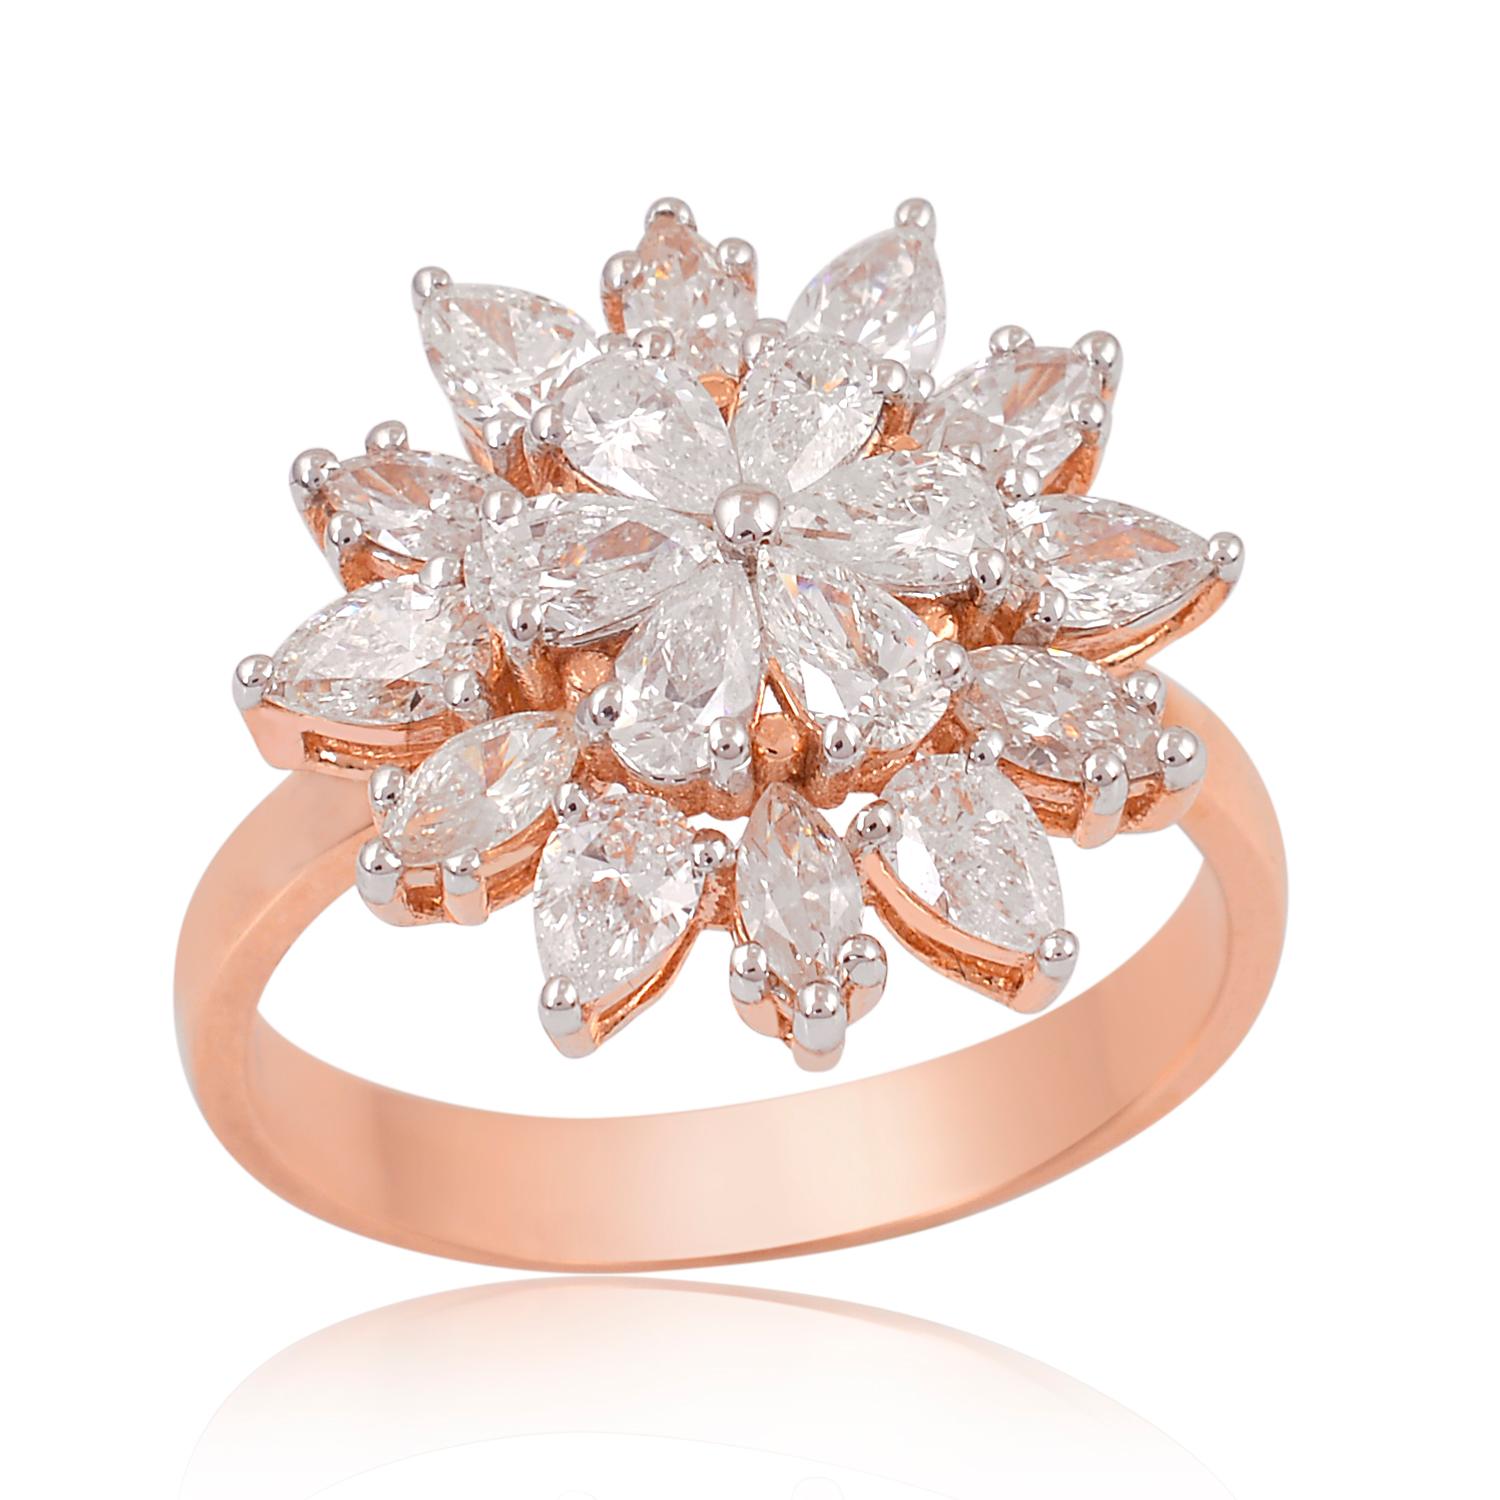 For Sale:  1.70 Carat SI Clarity HI Color Pear Marquise Diamond Ring 18 Karat Rose Gold 5